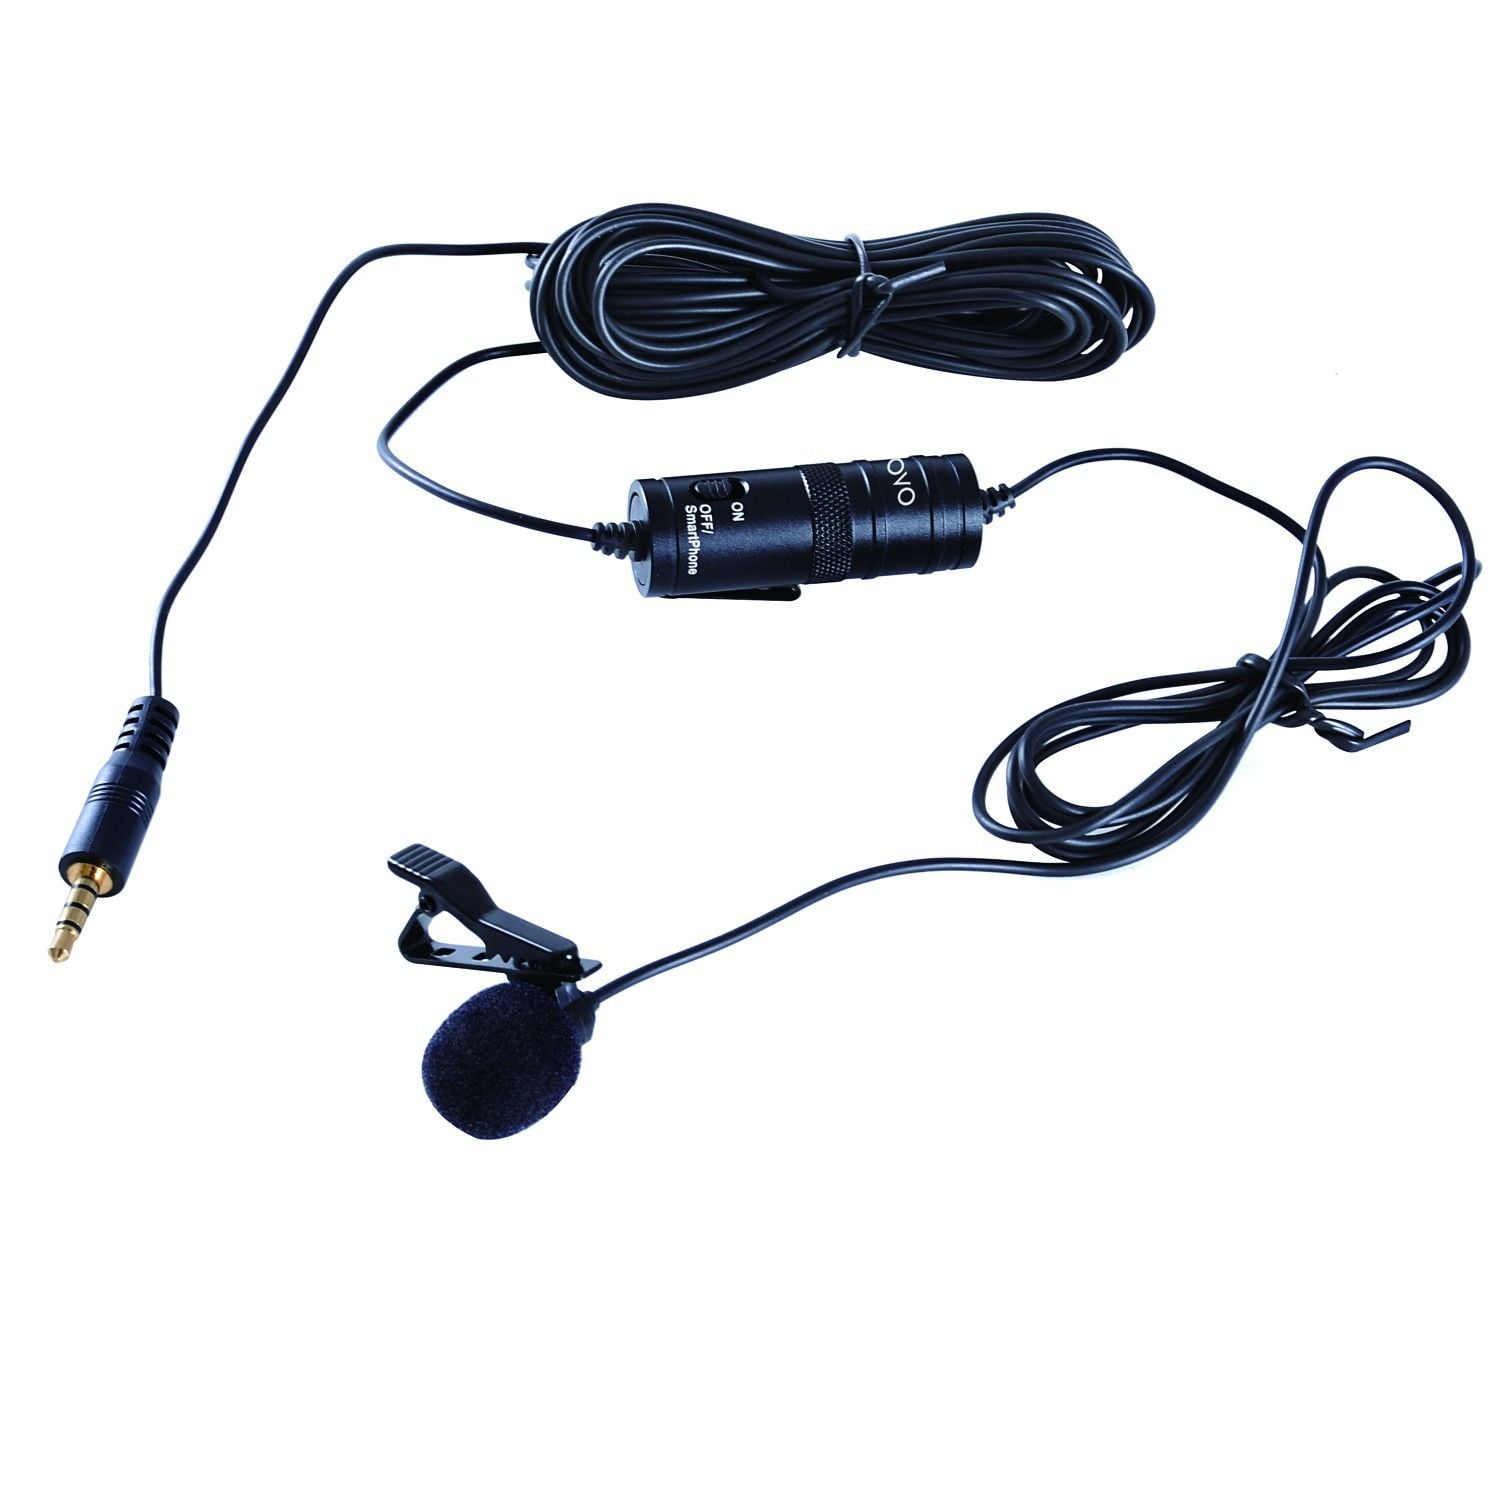 USB 20-foot Cord Clip On Lavalier Microphone for PC & Mac, M1